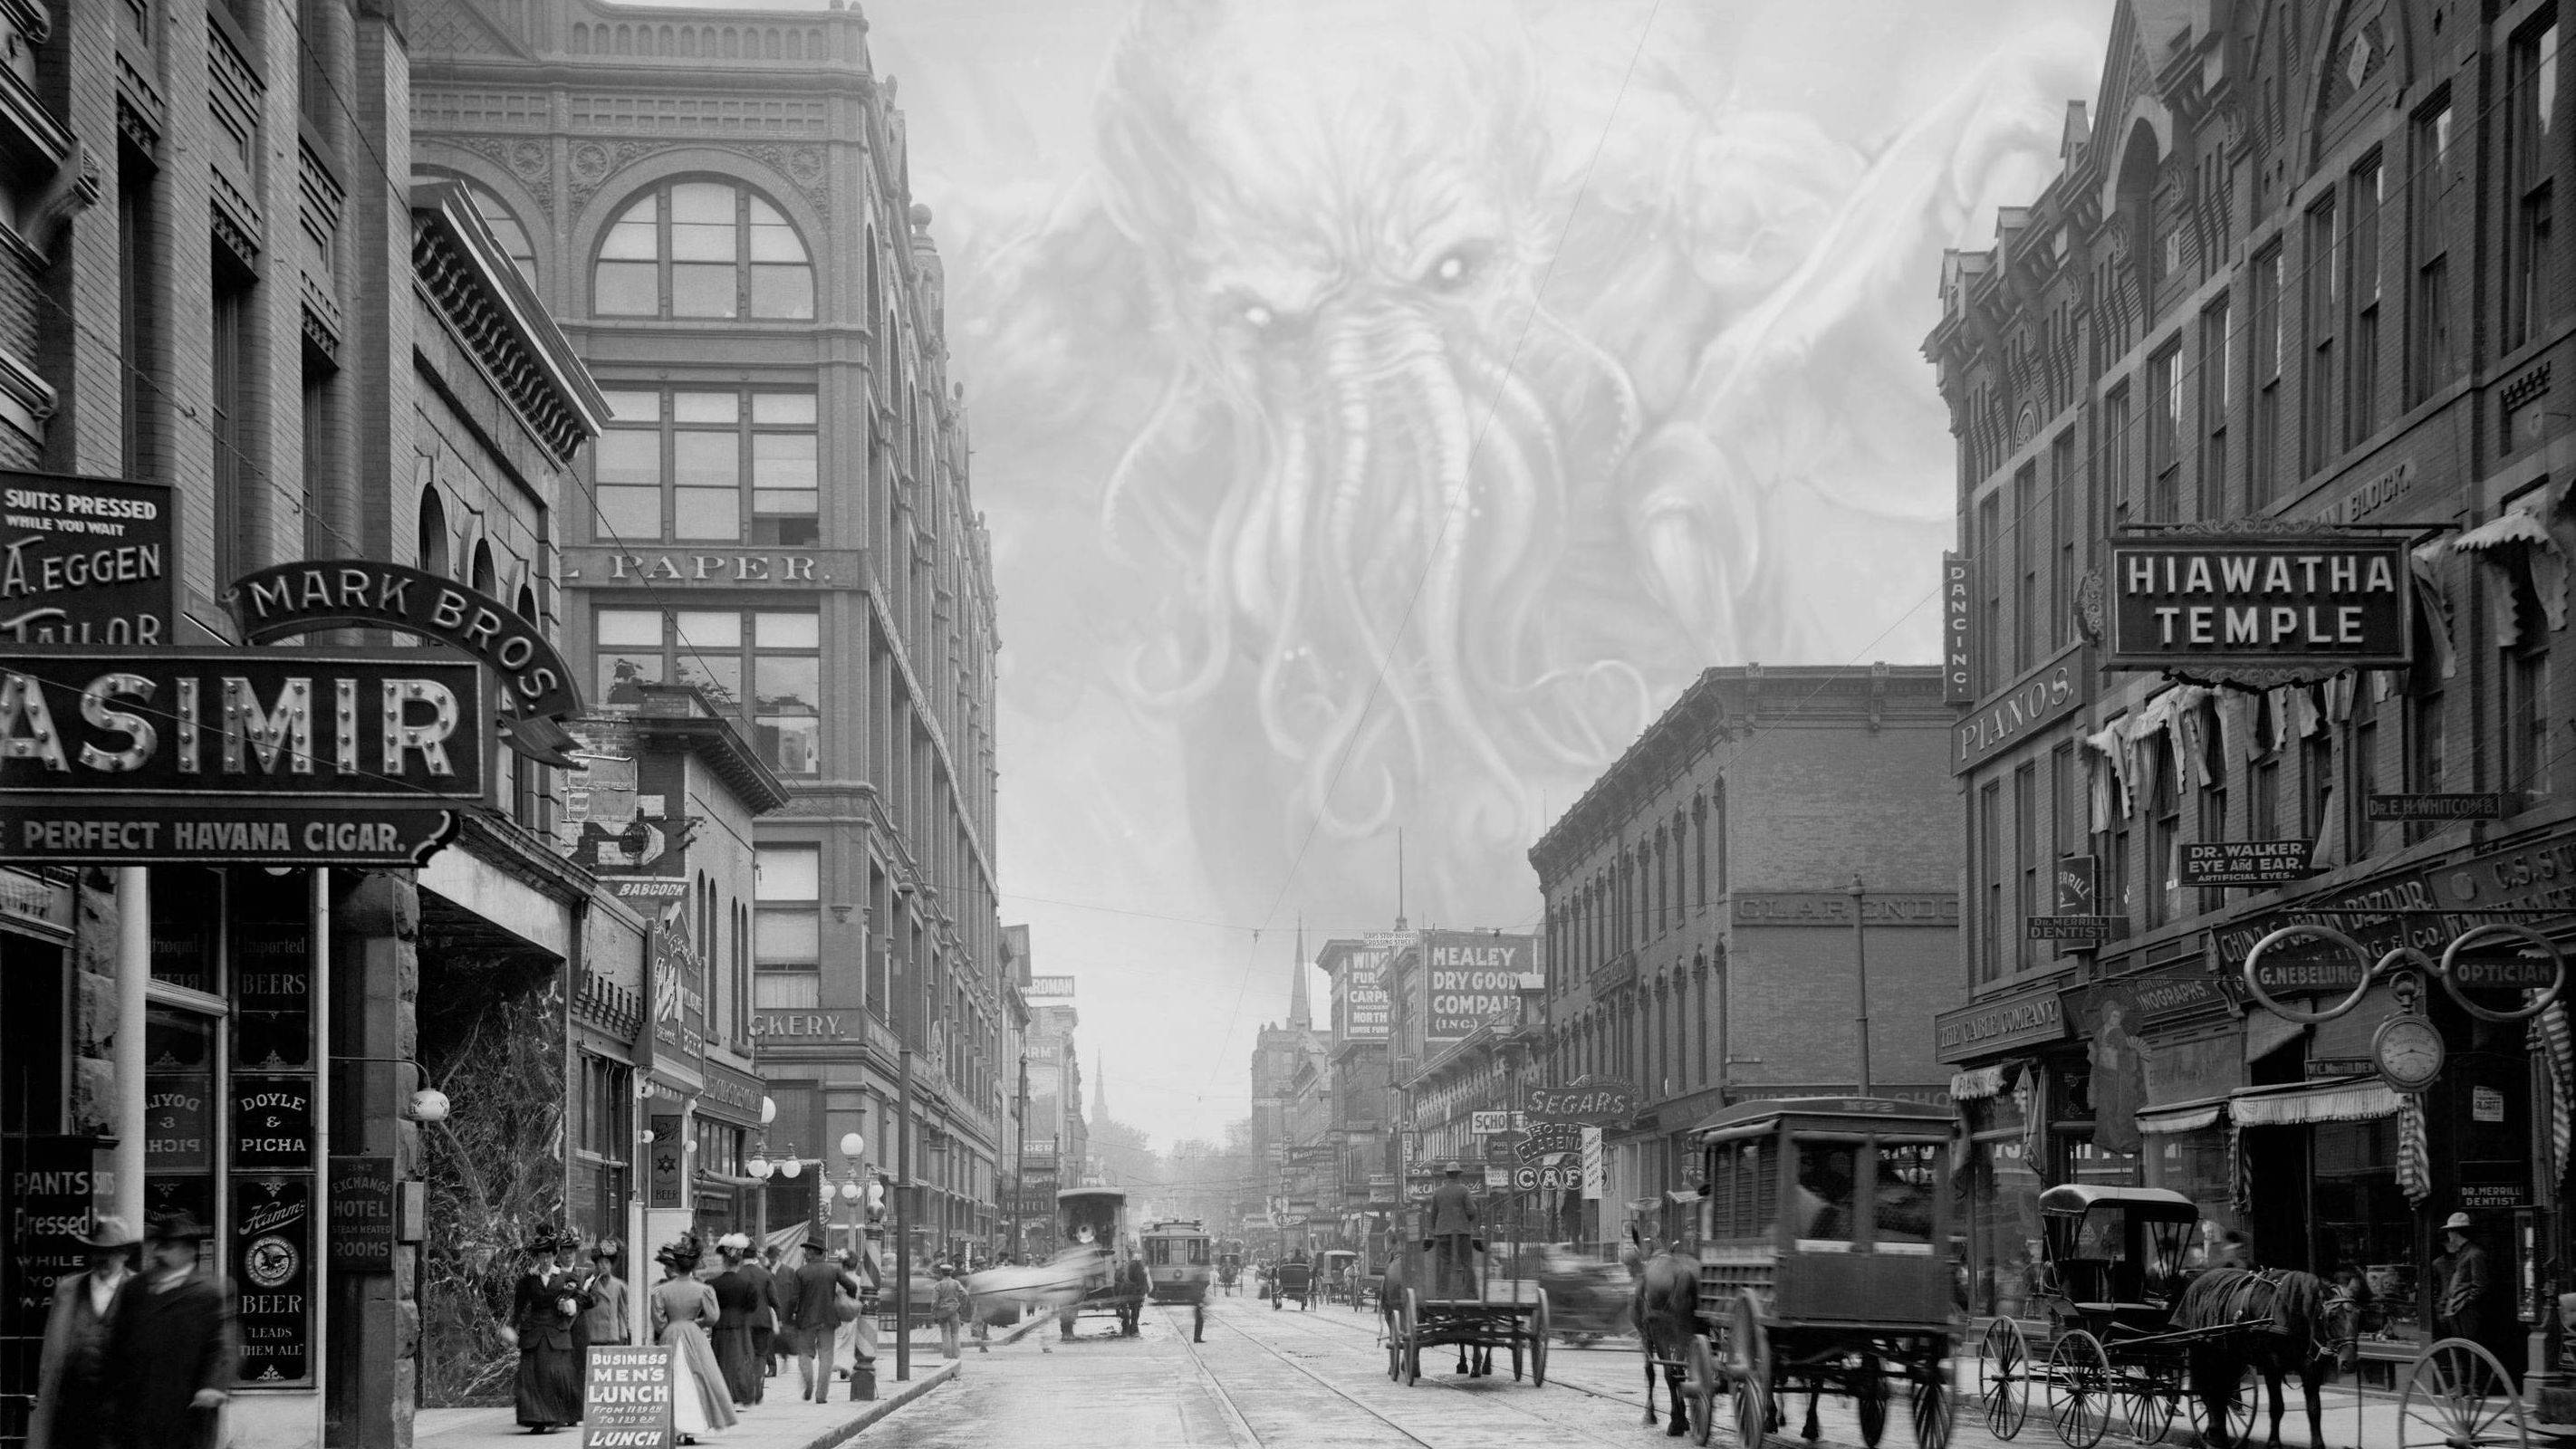 Cthulhu invading and old city street